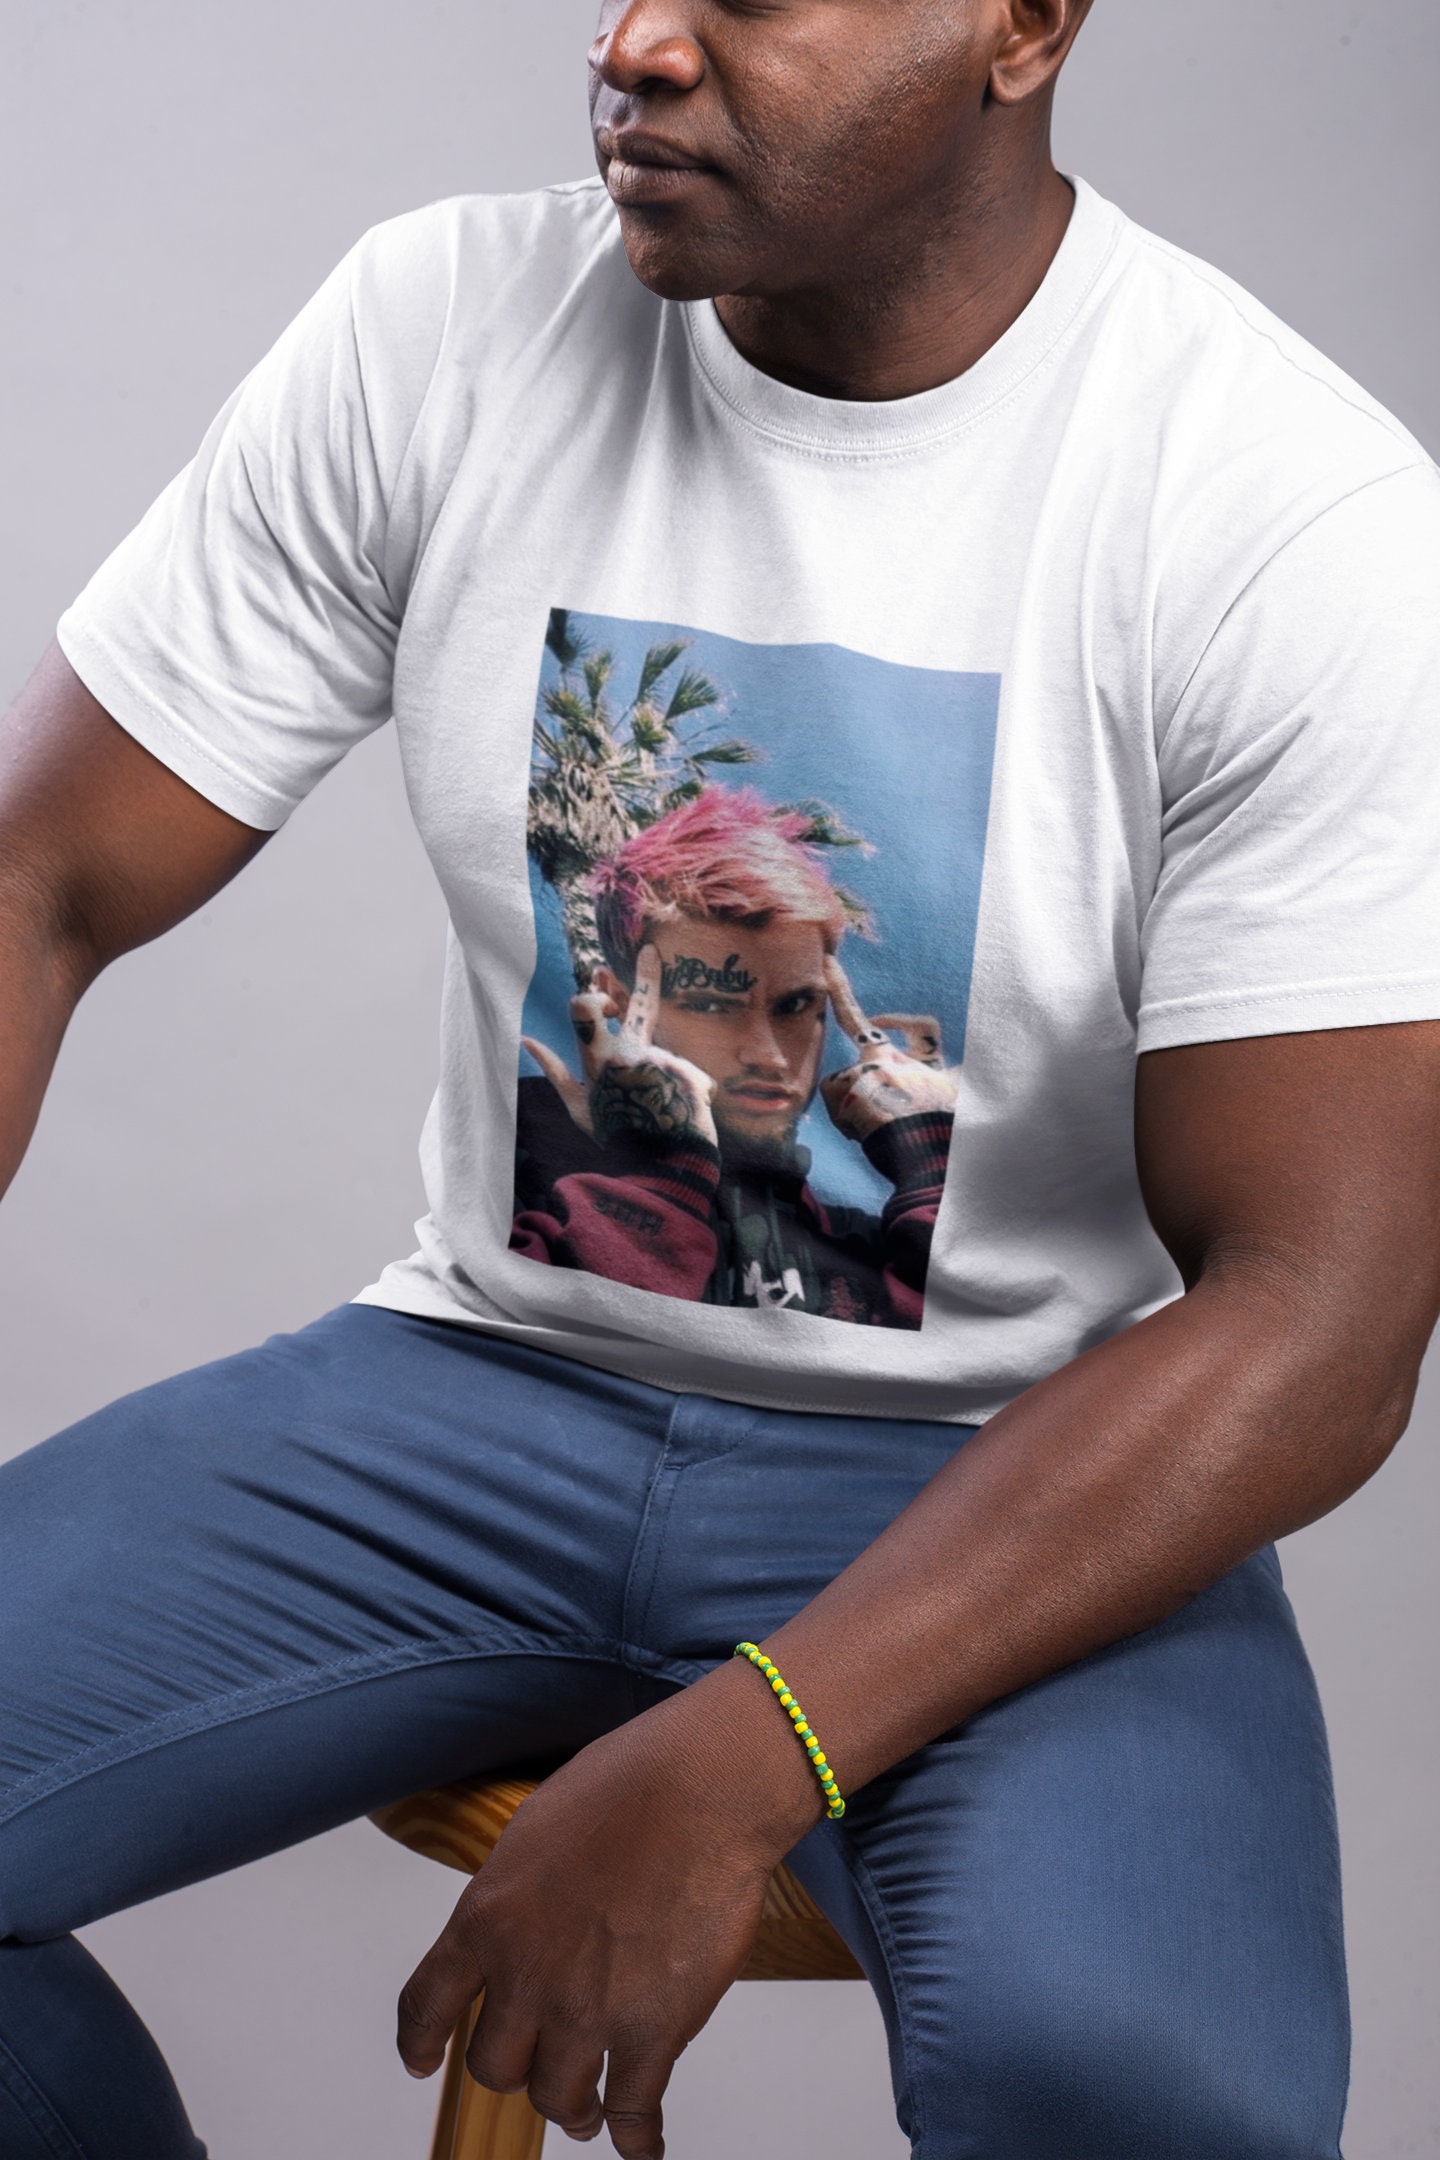 Discover Lil Peep Peepin' Soft Style T-Shirts